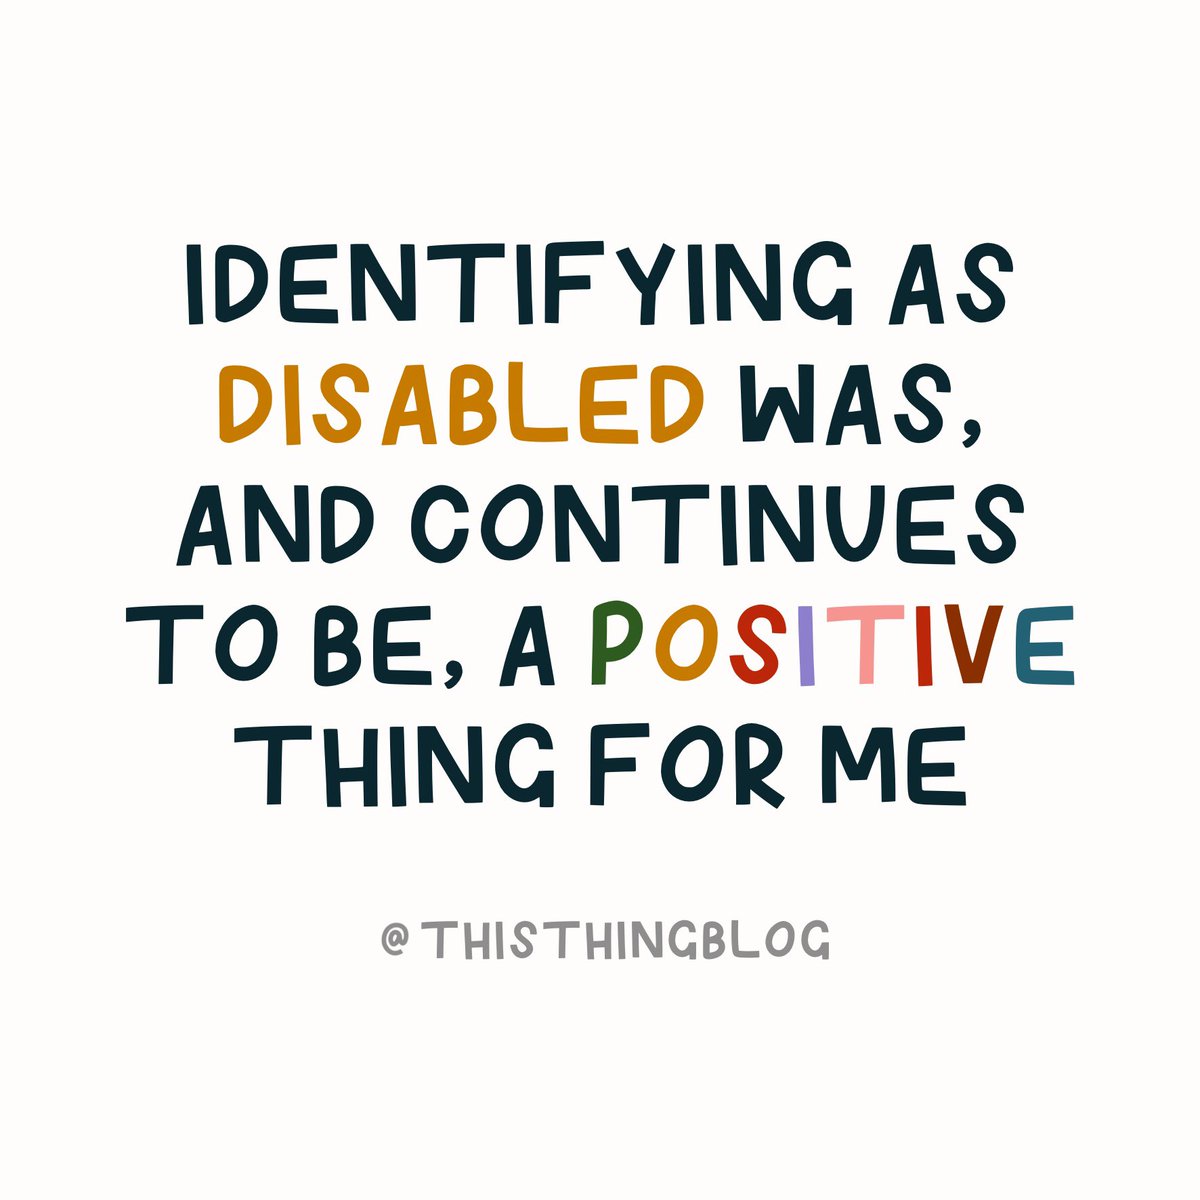 It took me years to say I was disabled with my chronic illness, as if I wasn’t allowed to use the word. As if I didn’t count.

Now I know better.

#DisabledIsNotABadWord #MECFS #ELCI